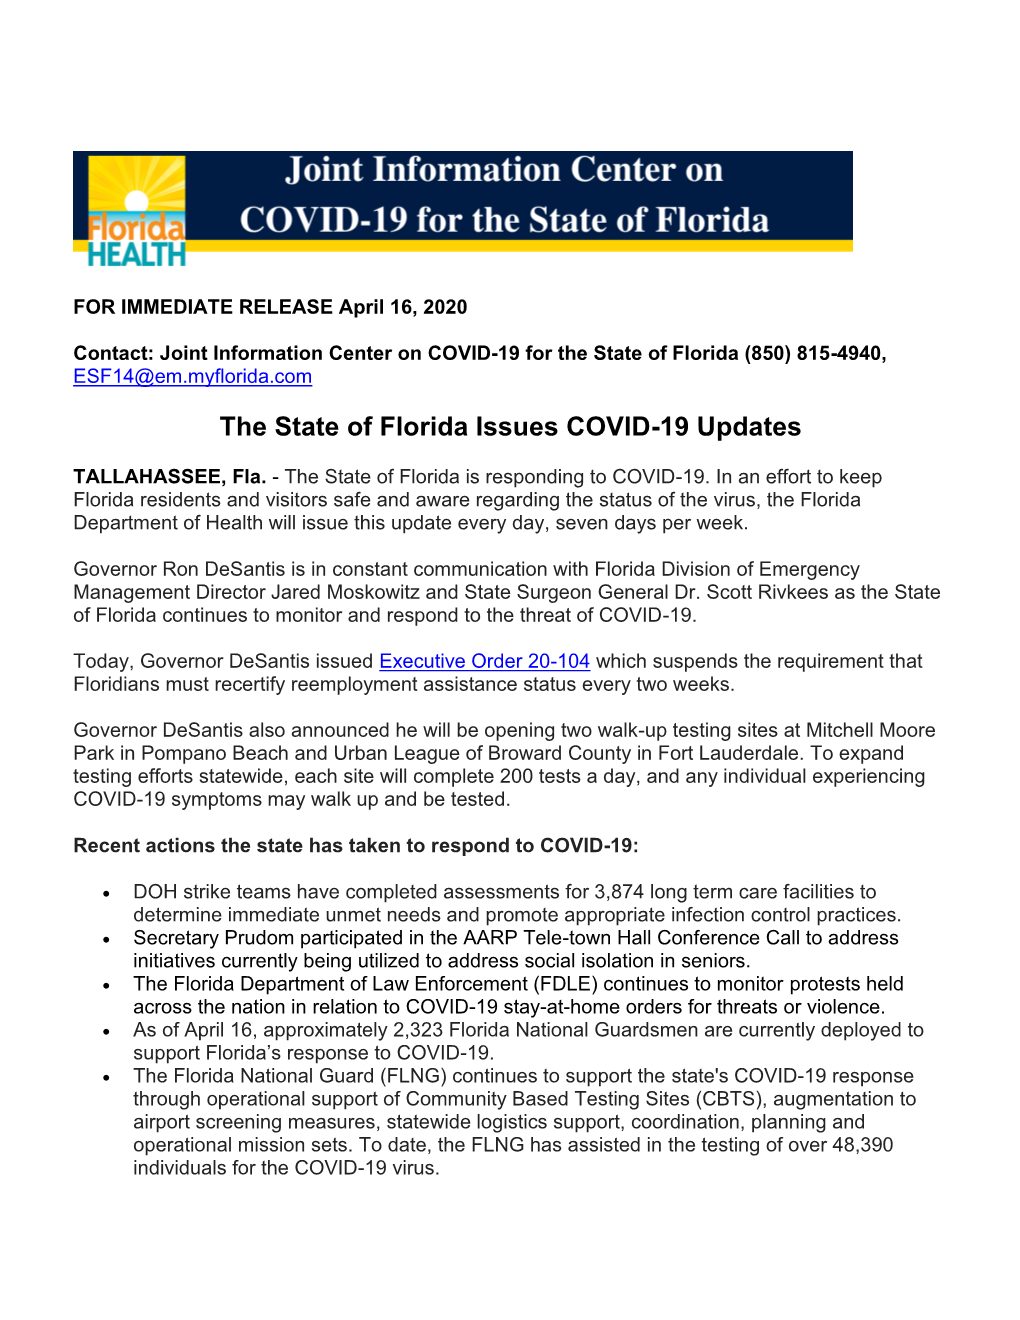 The State of Florida Issues COVID-19 Updates